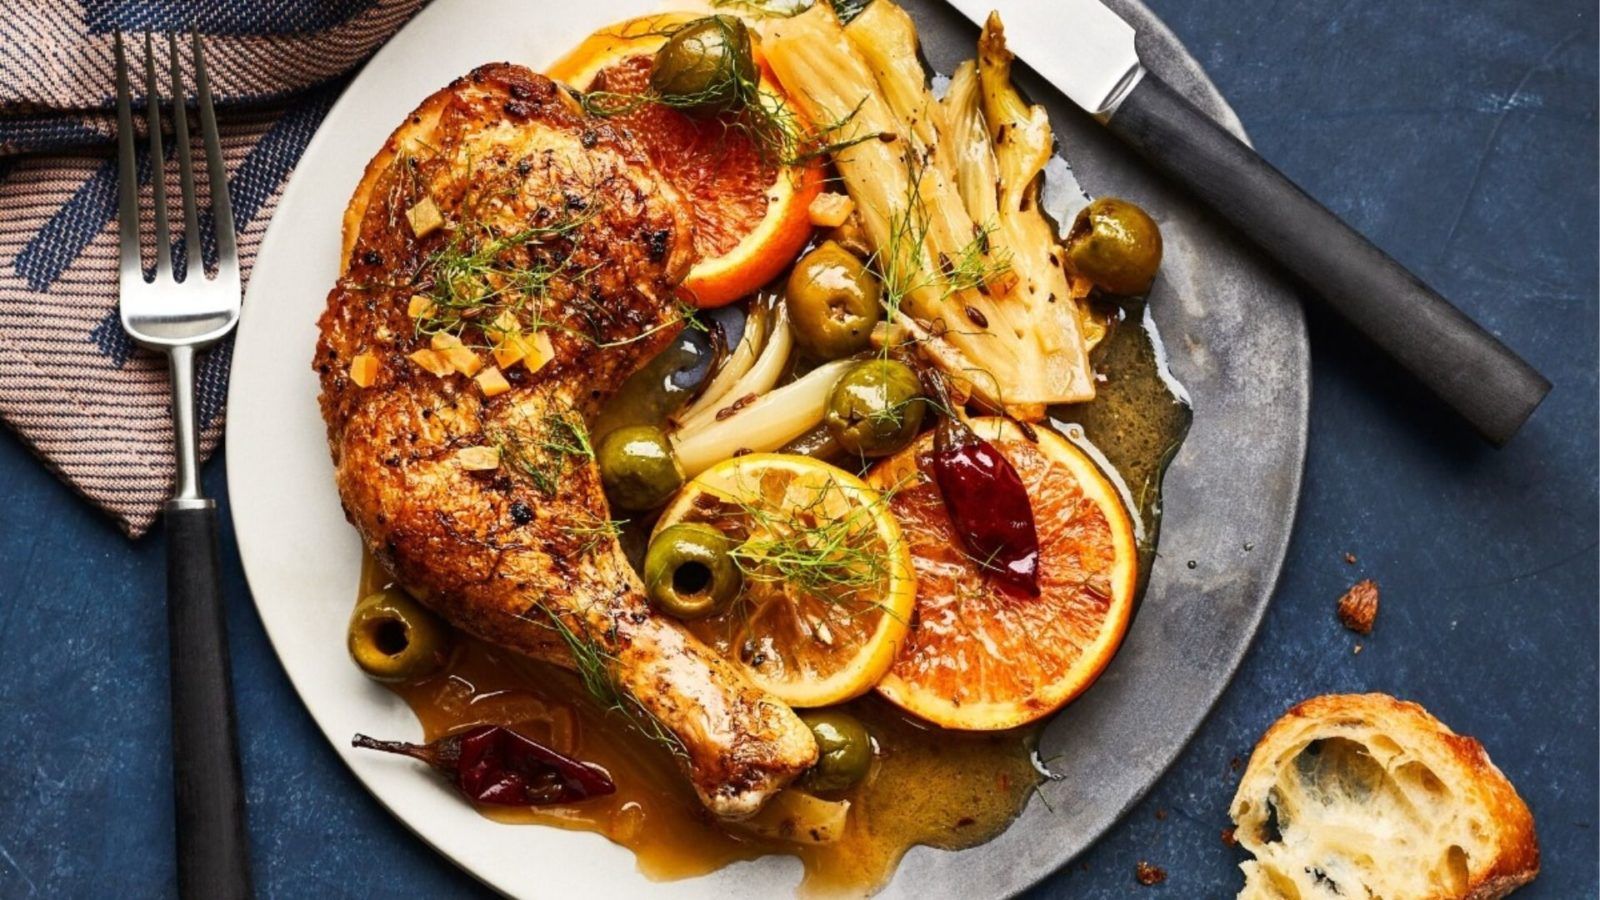 This delicious braised chicken recipe will be your new favourite homecooked meal